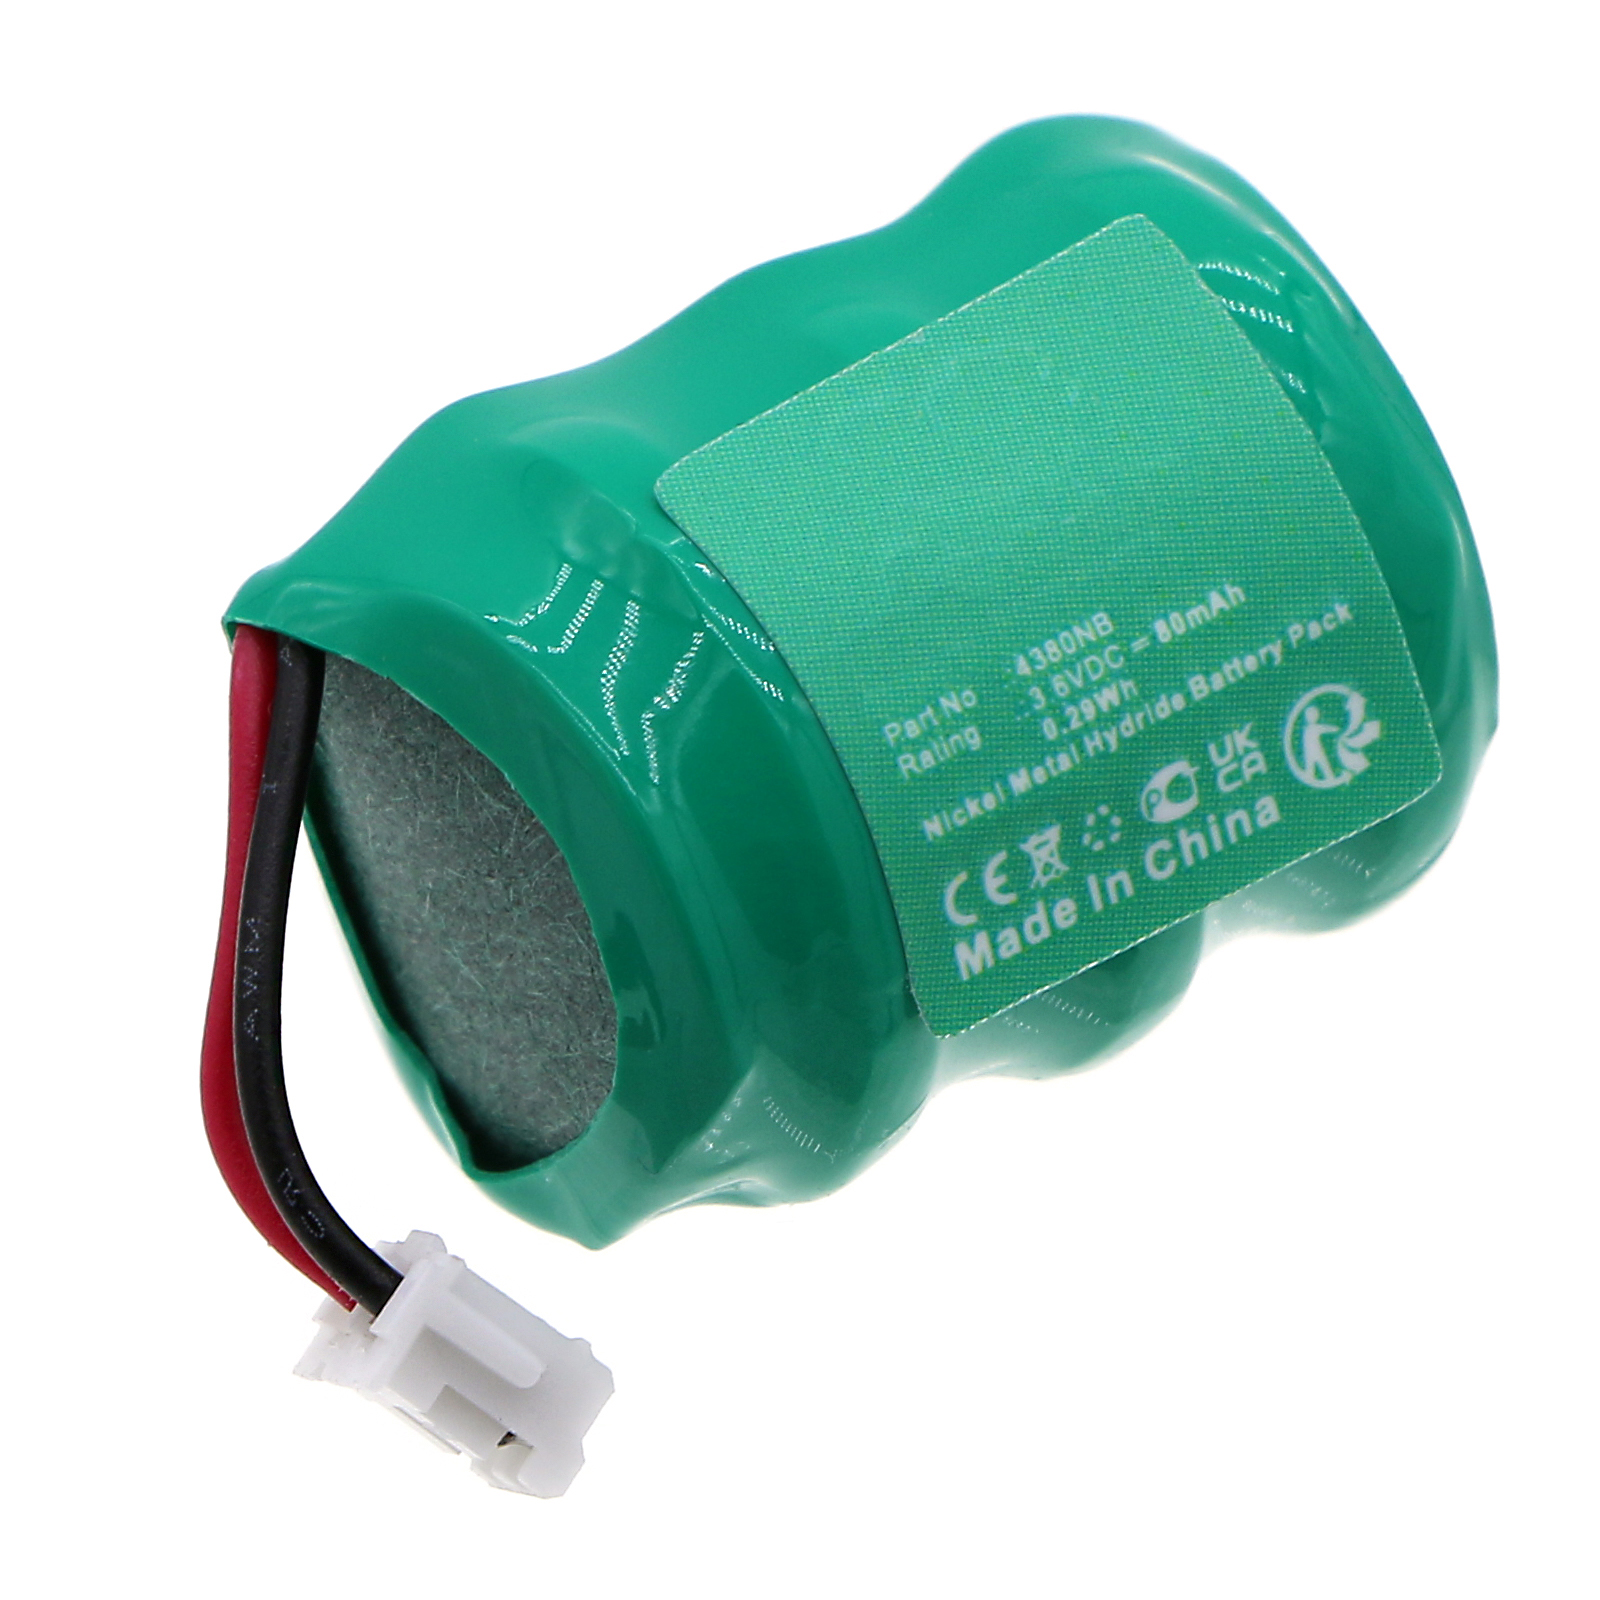 Synergy Digital Alarm System Battery, Compatible with Bticino 4380NB Alarm System Battery (Ni-MH, 3.6V, 80mAh)